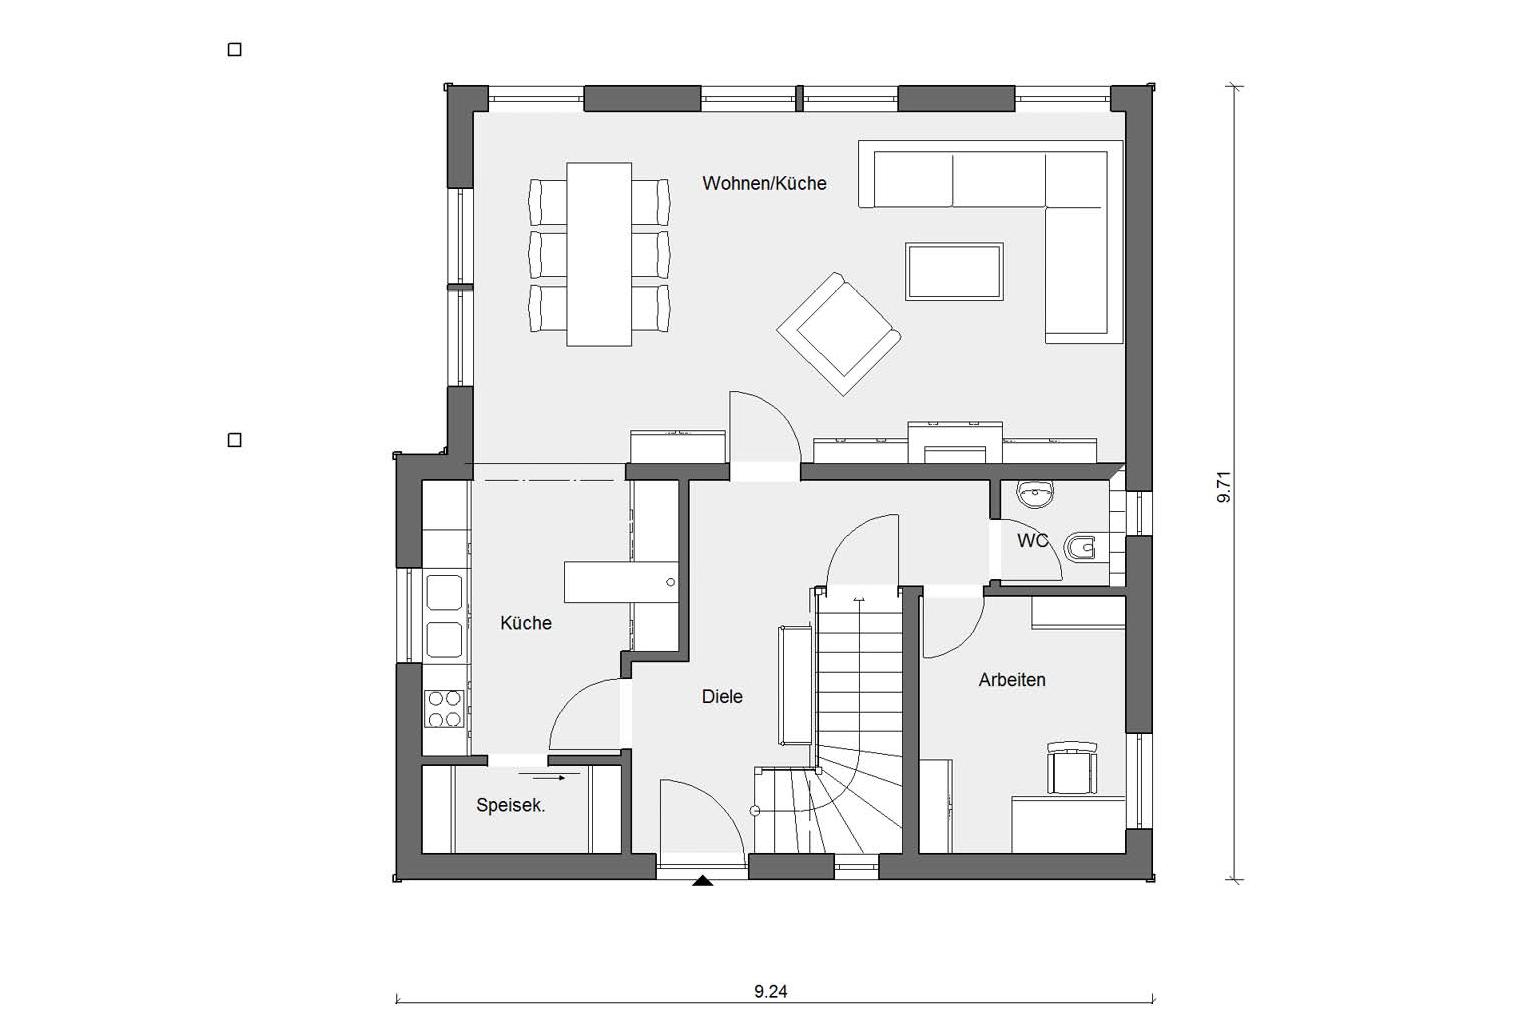 Ground floor layout E 15-143.5 House with wooden facade